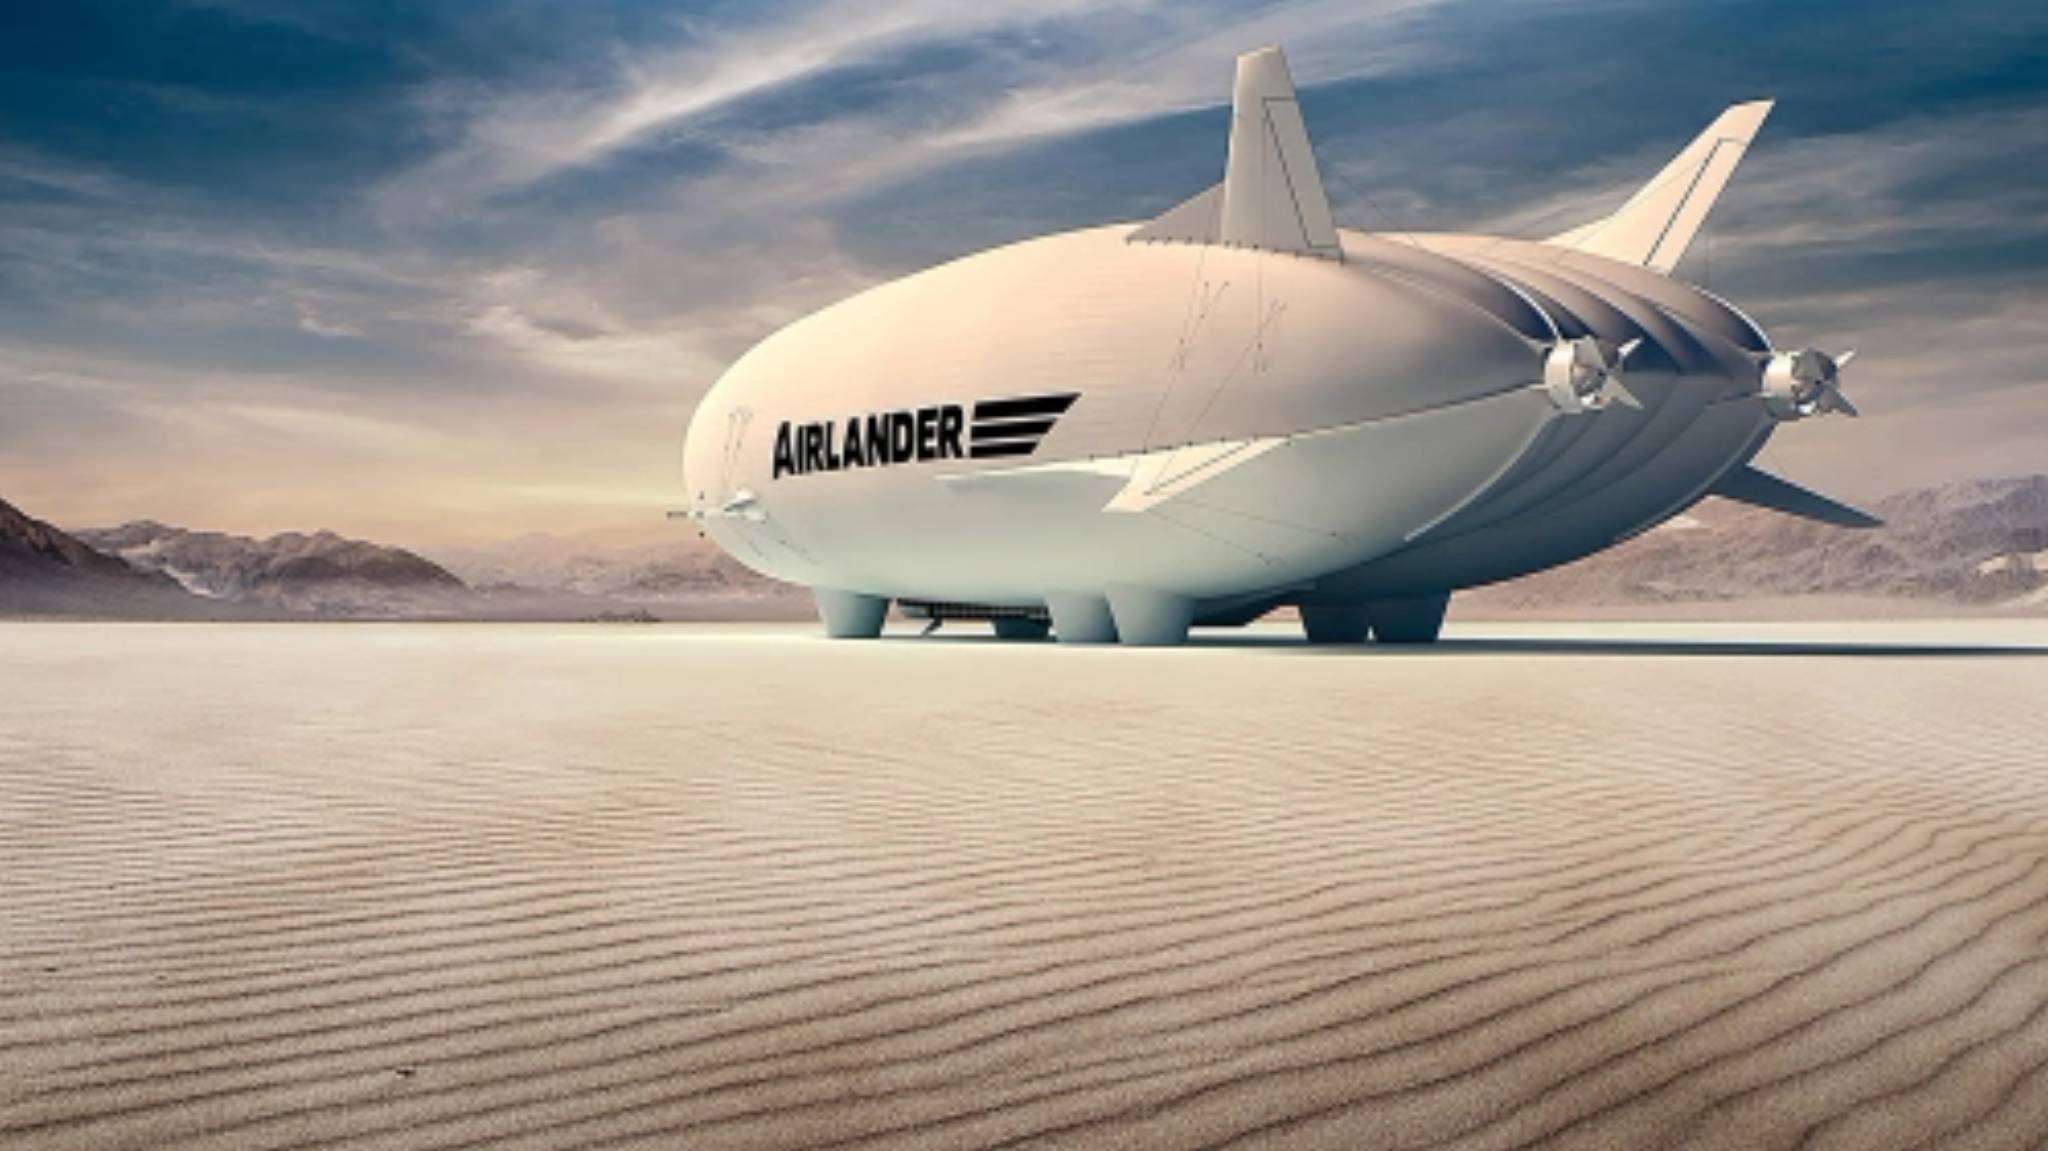 Hybrid Air Vehicles tap demand for sustainable travel